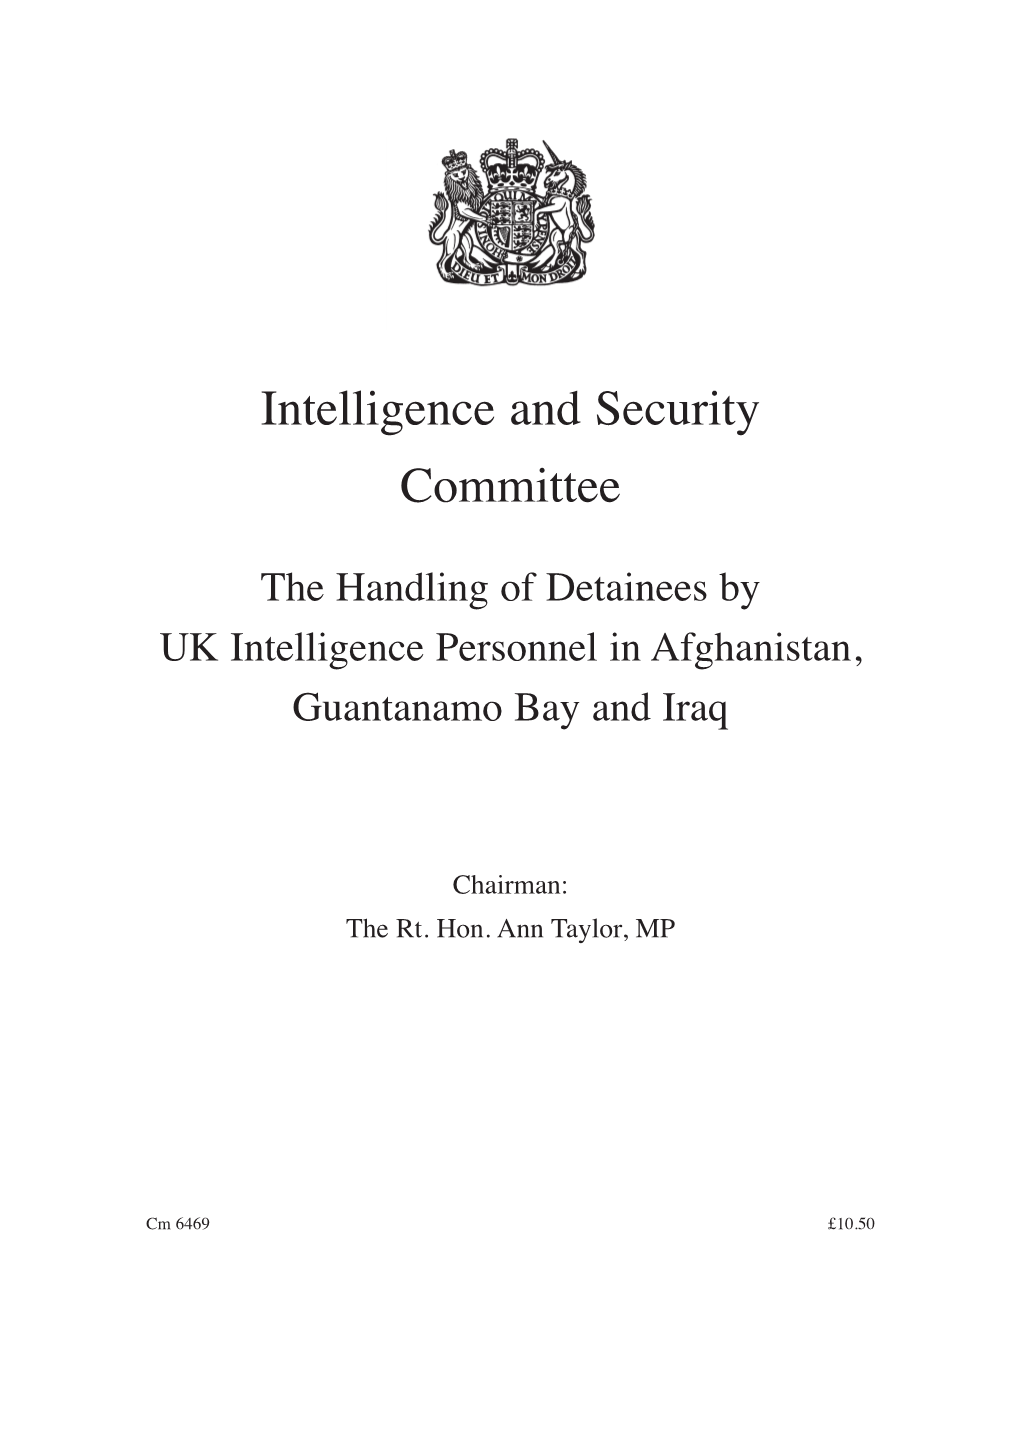 The Handling of Detainees by UK Intelligence Personnel in Afghanistan, Guantanamo Bay and Iraq